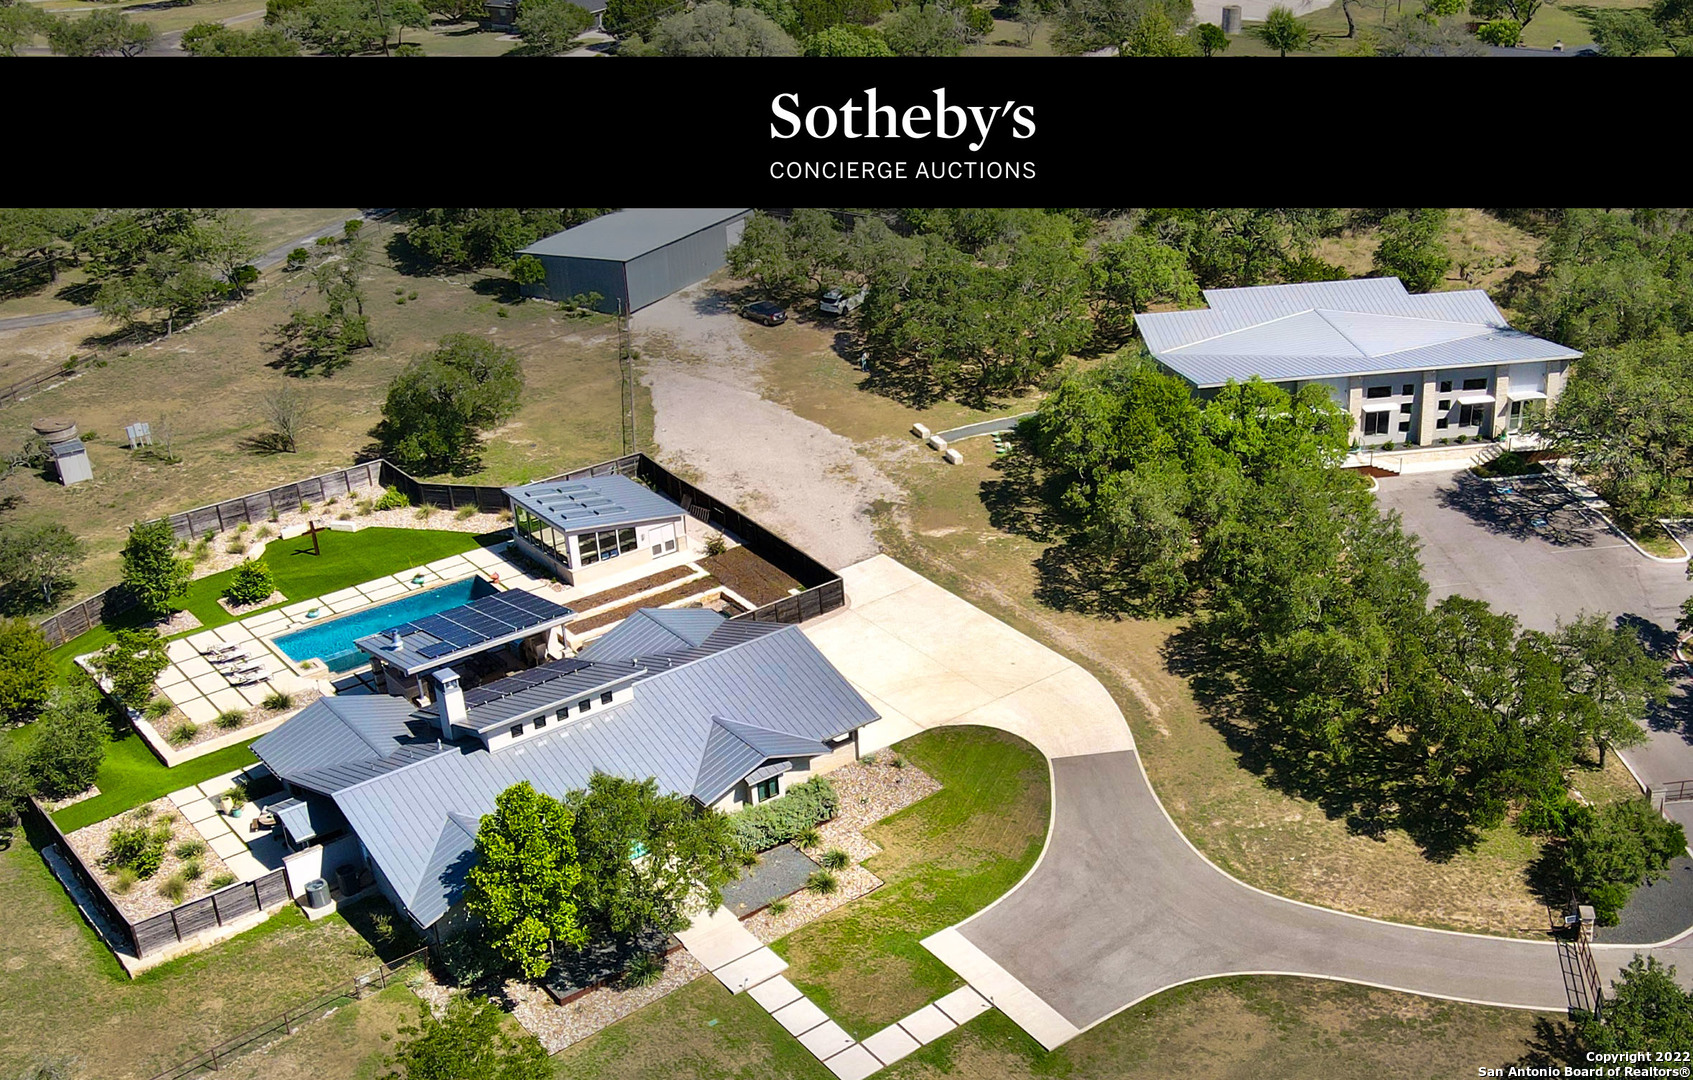 AUCTION BIDDING OPEN: Bidding ends August 31st. Previously Listed $4.5M. Current High Bid $1.525M. No Reserve. Showings Daily By Appt.     Located mere minutes from downtown Boerne's famous Hill Country Mile, 106 Sisterdale Road is a truly unique opportunity. This modern ranch home is custom-fitted with countless master crafted finishes and boasts its own state-of-the-art commercial/showroom on the property itself. Natural stone floors, custom-made lights, artisan plaster walls, and bespoke detailed woodwork throughout speak to the unmatched craftsmanship at every turn. The main house is ideal for entertaining. The bright chef's kitchen with concrete counters and ample room to gather opens to the indoor living space, transitioning in turn to the spectacular outdoor entertaining space. Verdant lawns meet a sprawling patio, surrounding a turquoise pool that invites you to soak the day away. Outdoors, a separate gated entrance and parking area ensure convenient access to all amenities. The showroom, currently operating as a Pilates studio, is fitted with every feature for turnkey takeover: insulated concrete walls, LED lighting, a full water catchment system, custom locker rooms, kitchen with laundry, and private offices await within. Ideal for a studio, gallery, or an at-home office or retail space, the area allows for flexible-use to live and work in modern luxury. With potential for the transformation or addition of a guest house or staff quarters, you can create the ultimate family compound or a world-class equestrian estate as the nearly 4-acre property offers a desirable blend of commercial and residential possibilities.